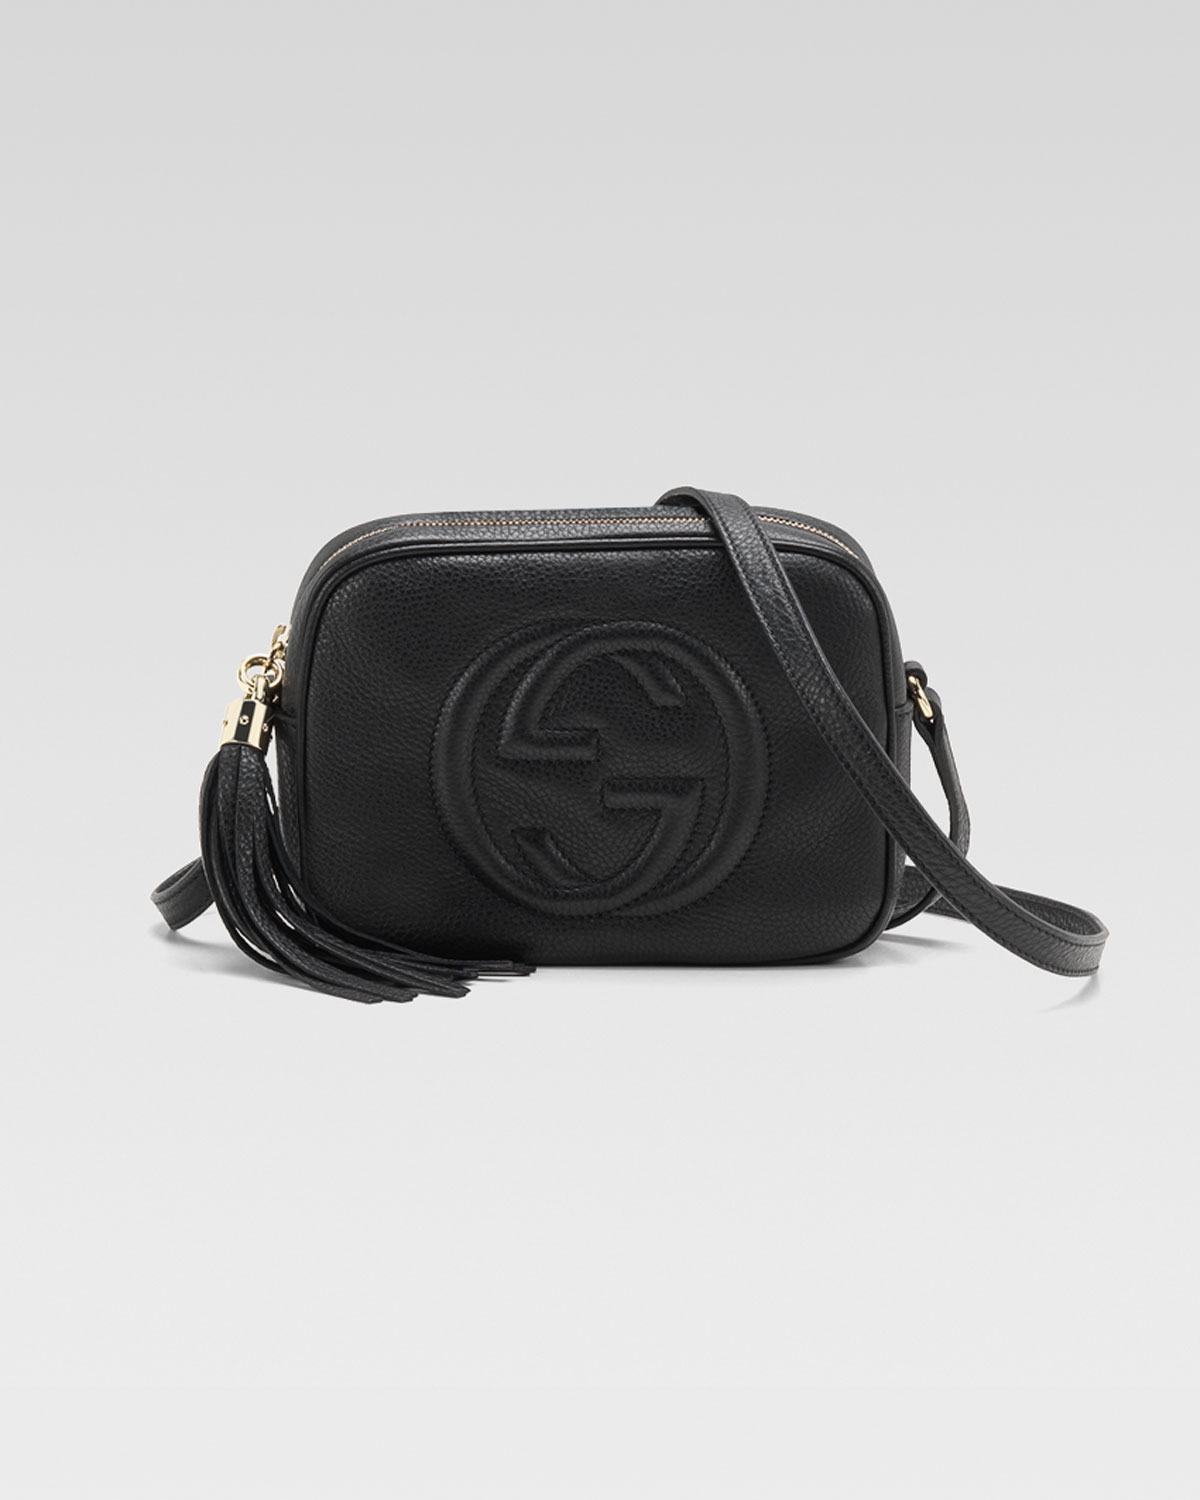 Gucci Soho Leather Disco Bag in Black - Lyst